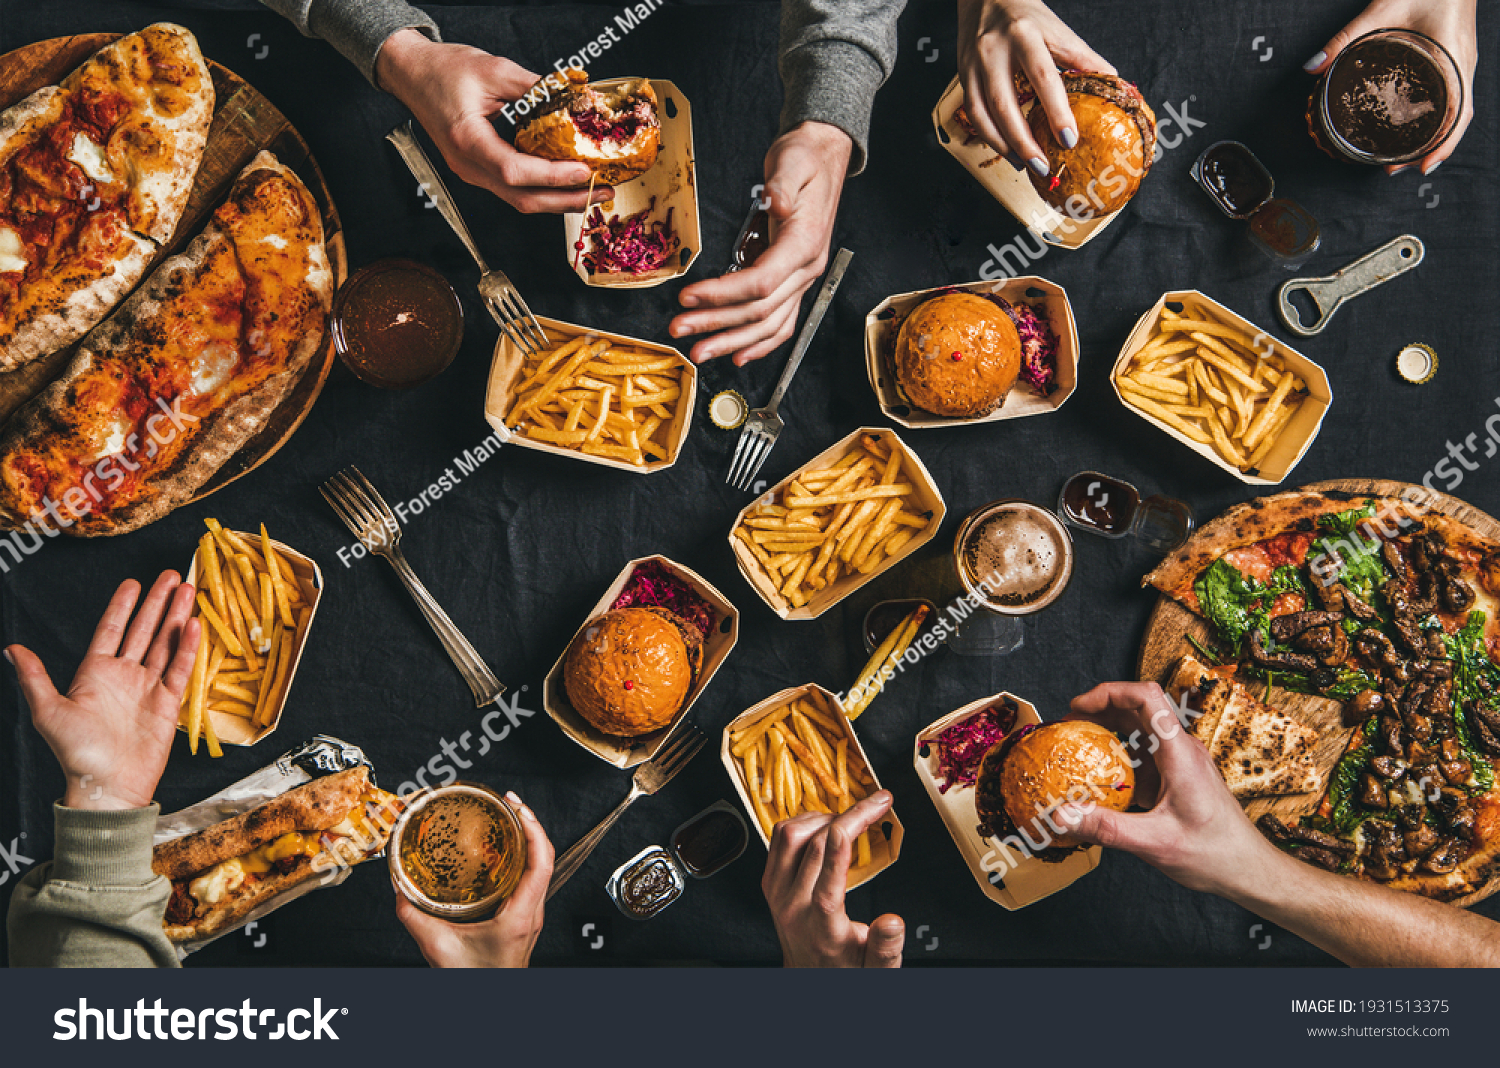 Lockdown fast food dinner from delivery service. Flat-lay of peoples hands eating burger, fries, sandwiche, pizza, drinking beer over table background, top view. Quarantine home party, takeaway food #1931513375